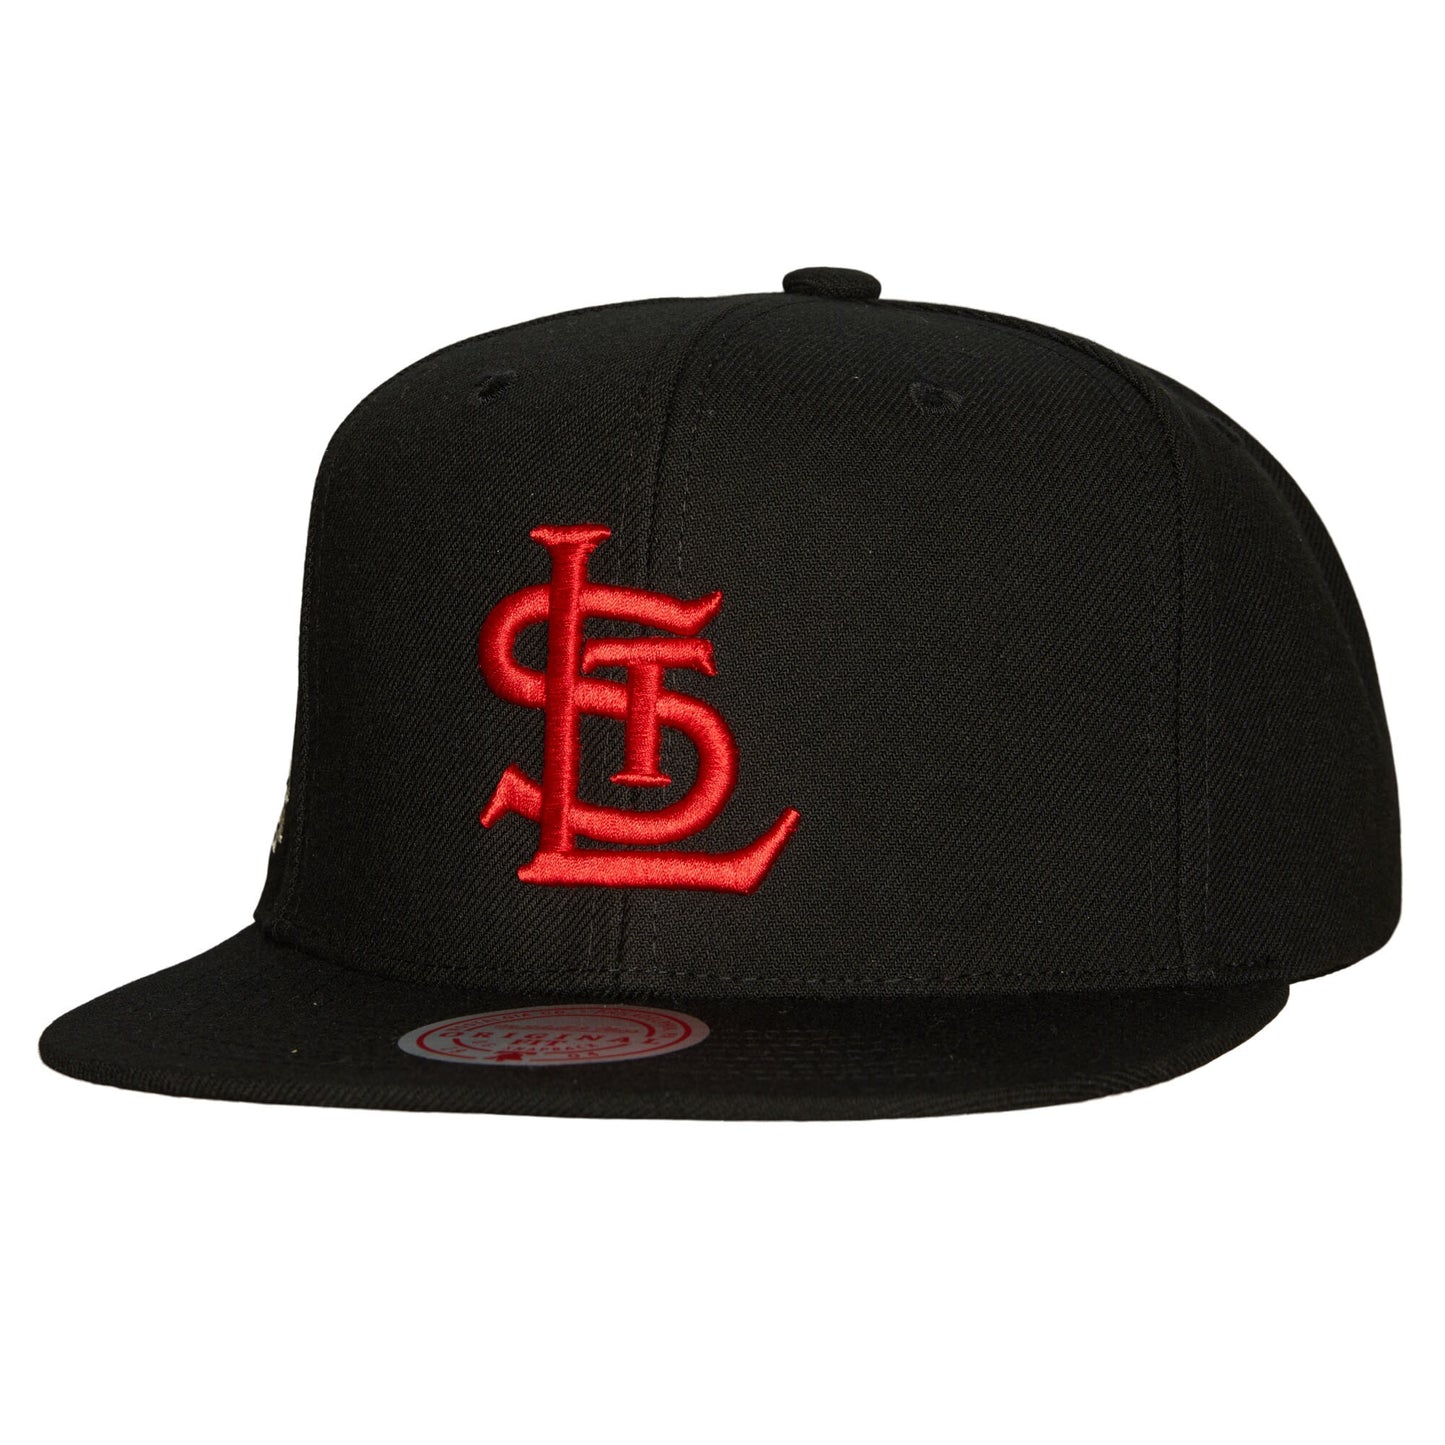 St. Louis Cardinals Mitchell & Ness Cooperstown Collection True Classics Snapback Hat - Black